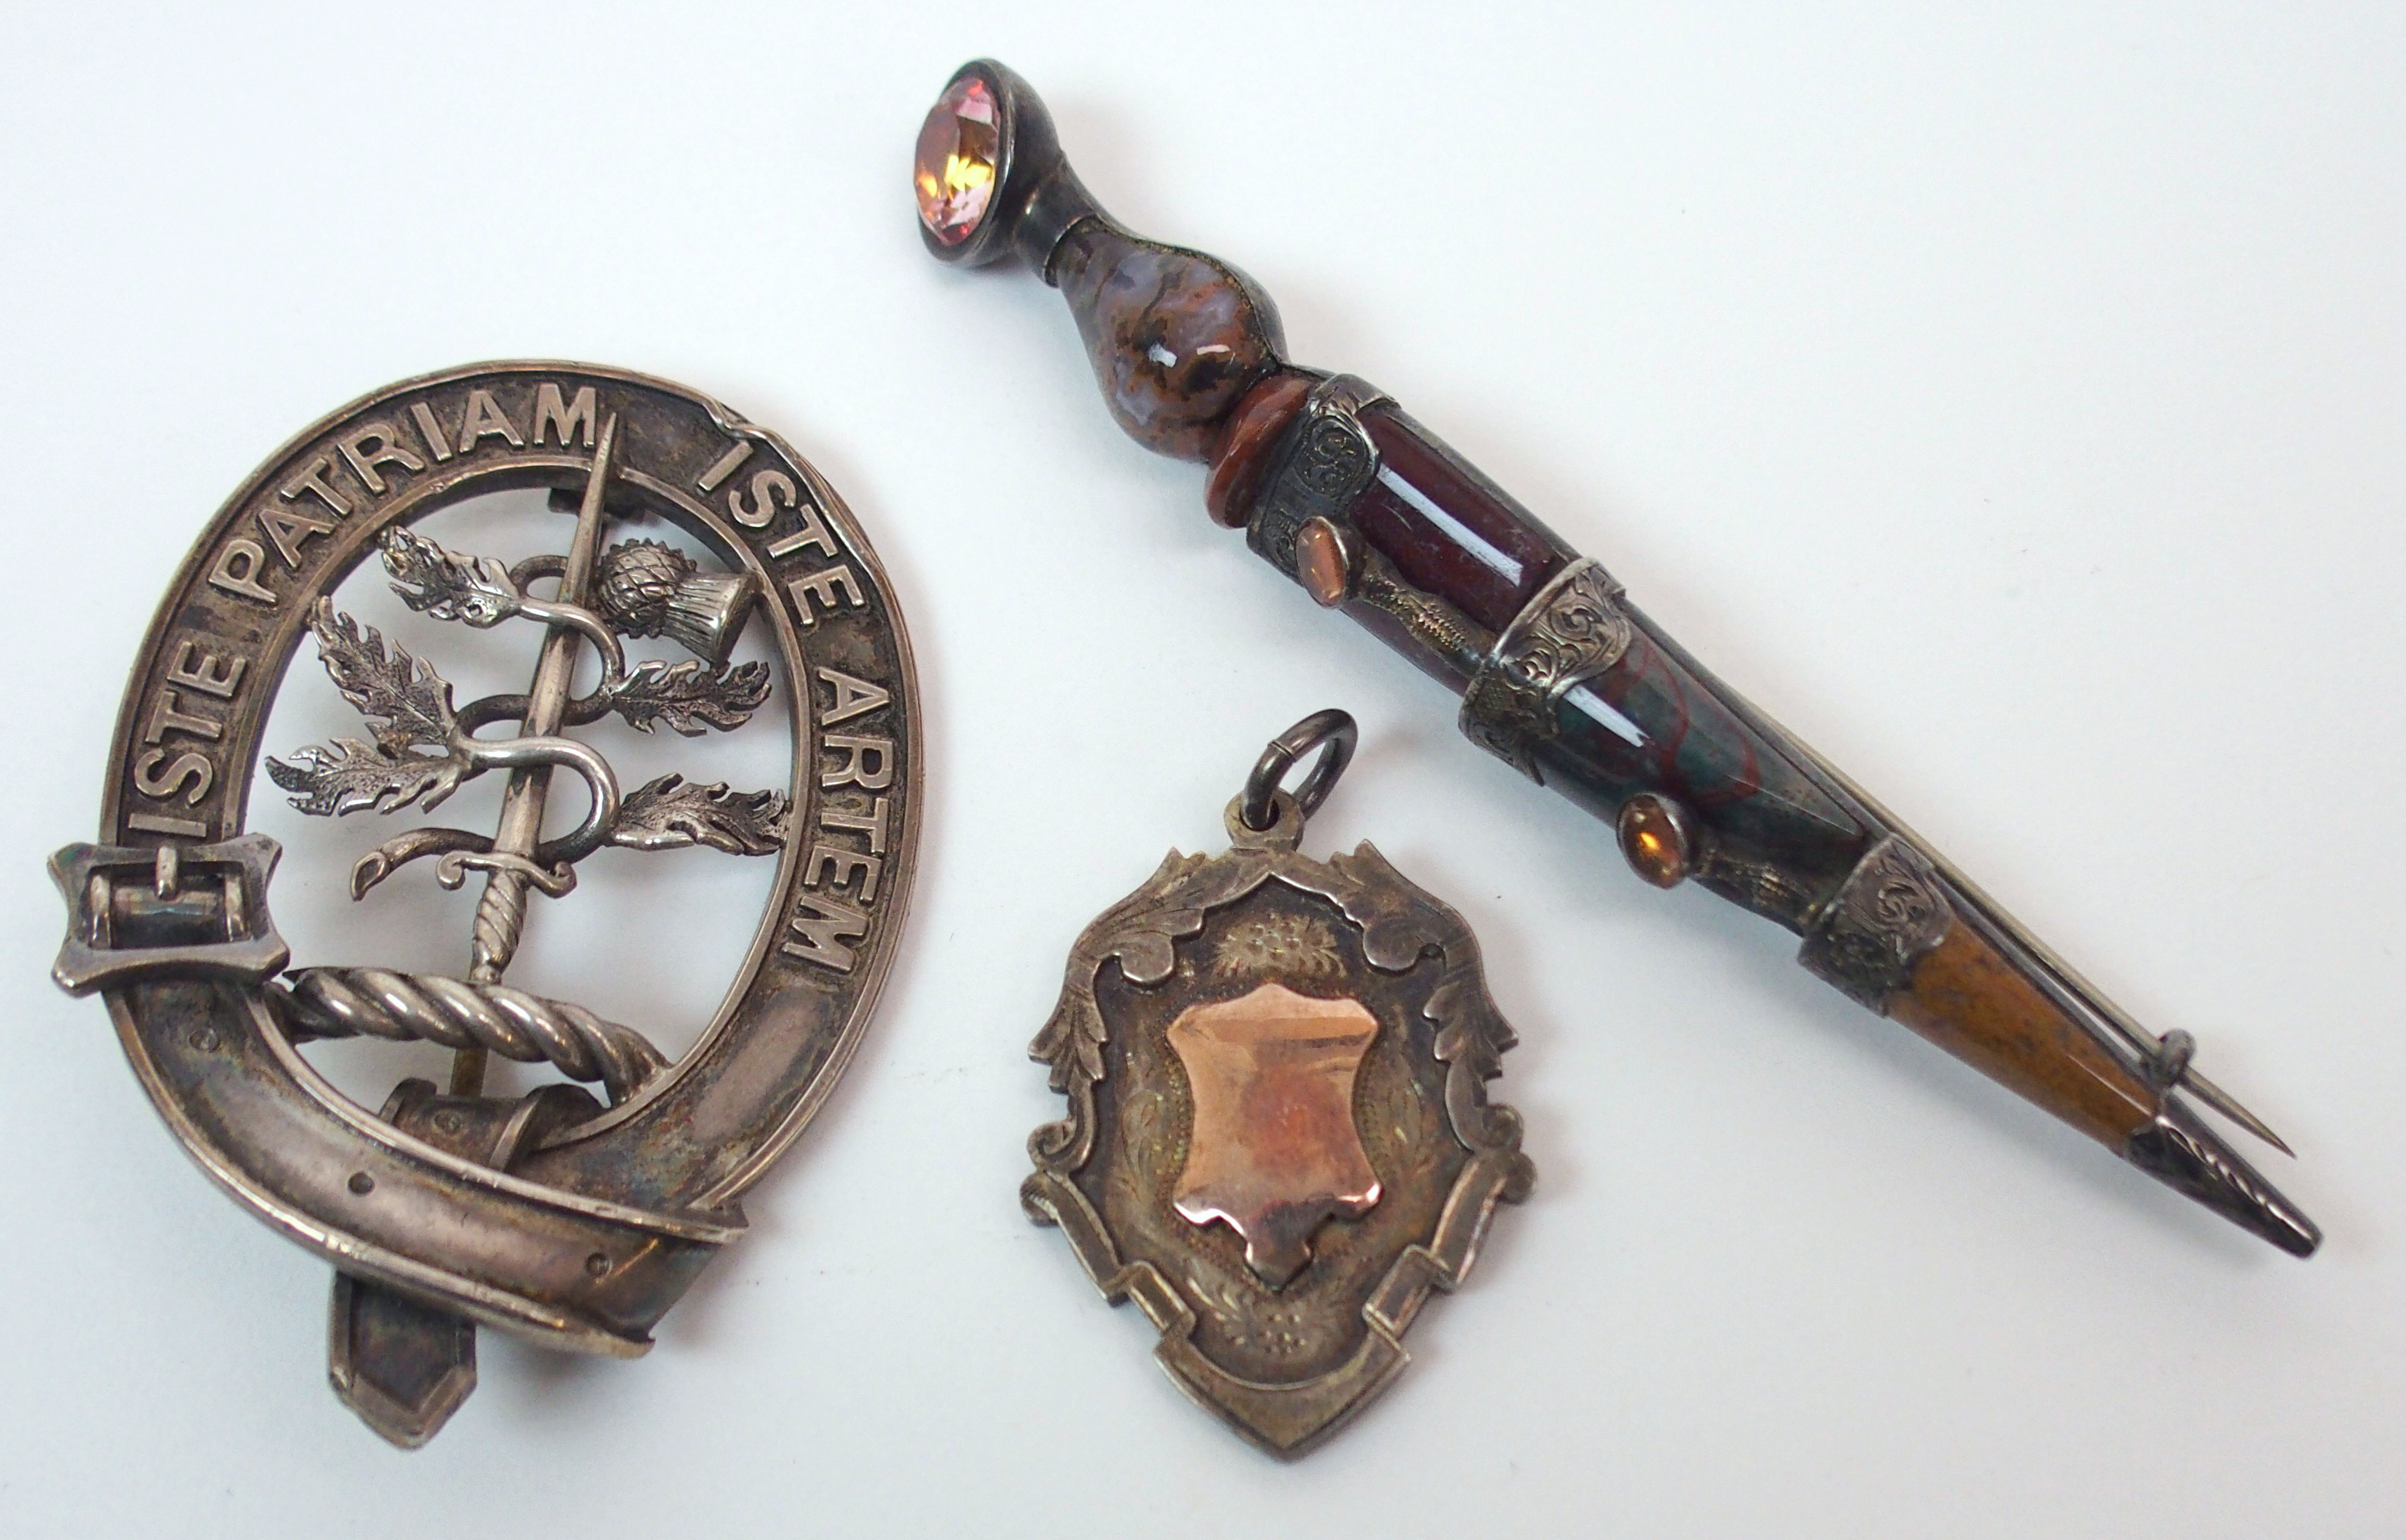 A Victorian Scottish agate kilt pin modelled as a dirk, with a white metal clan badge 'Iste Patriam,